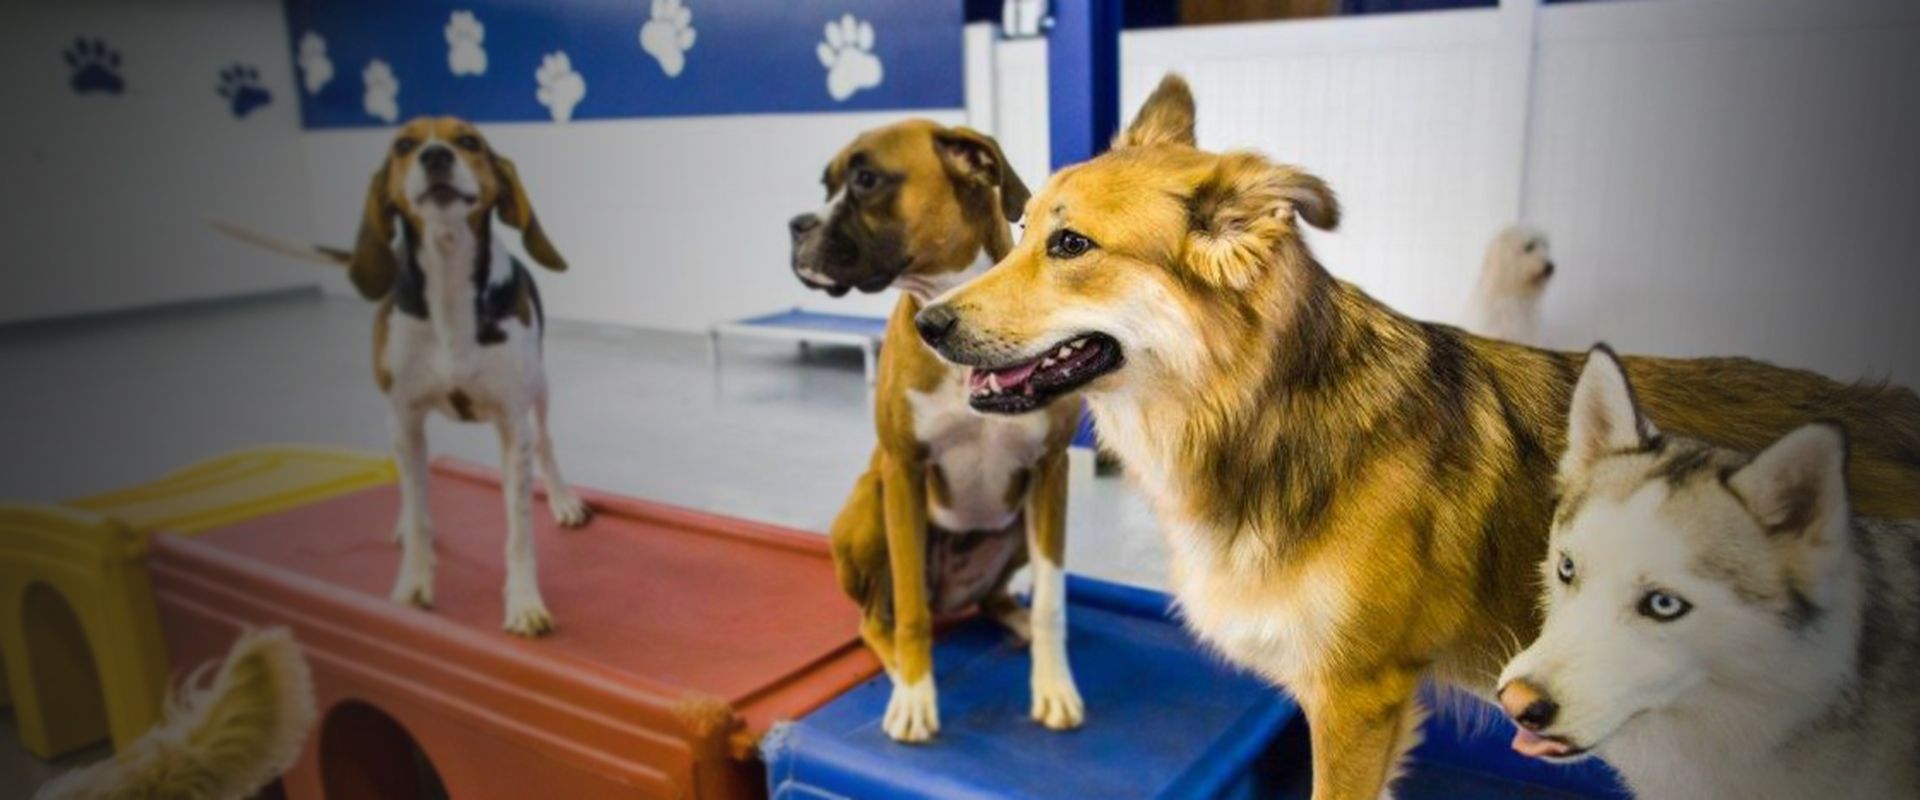 dogs at the woof room daycare